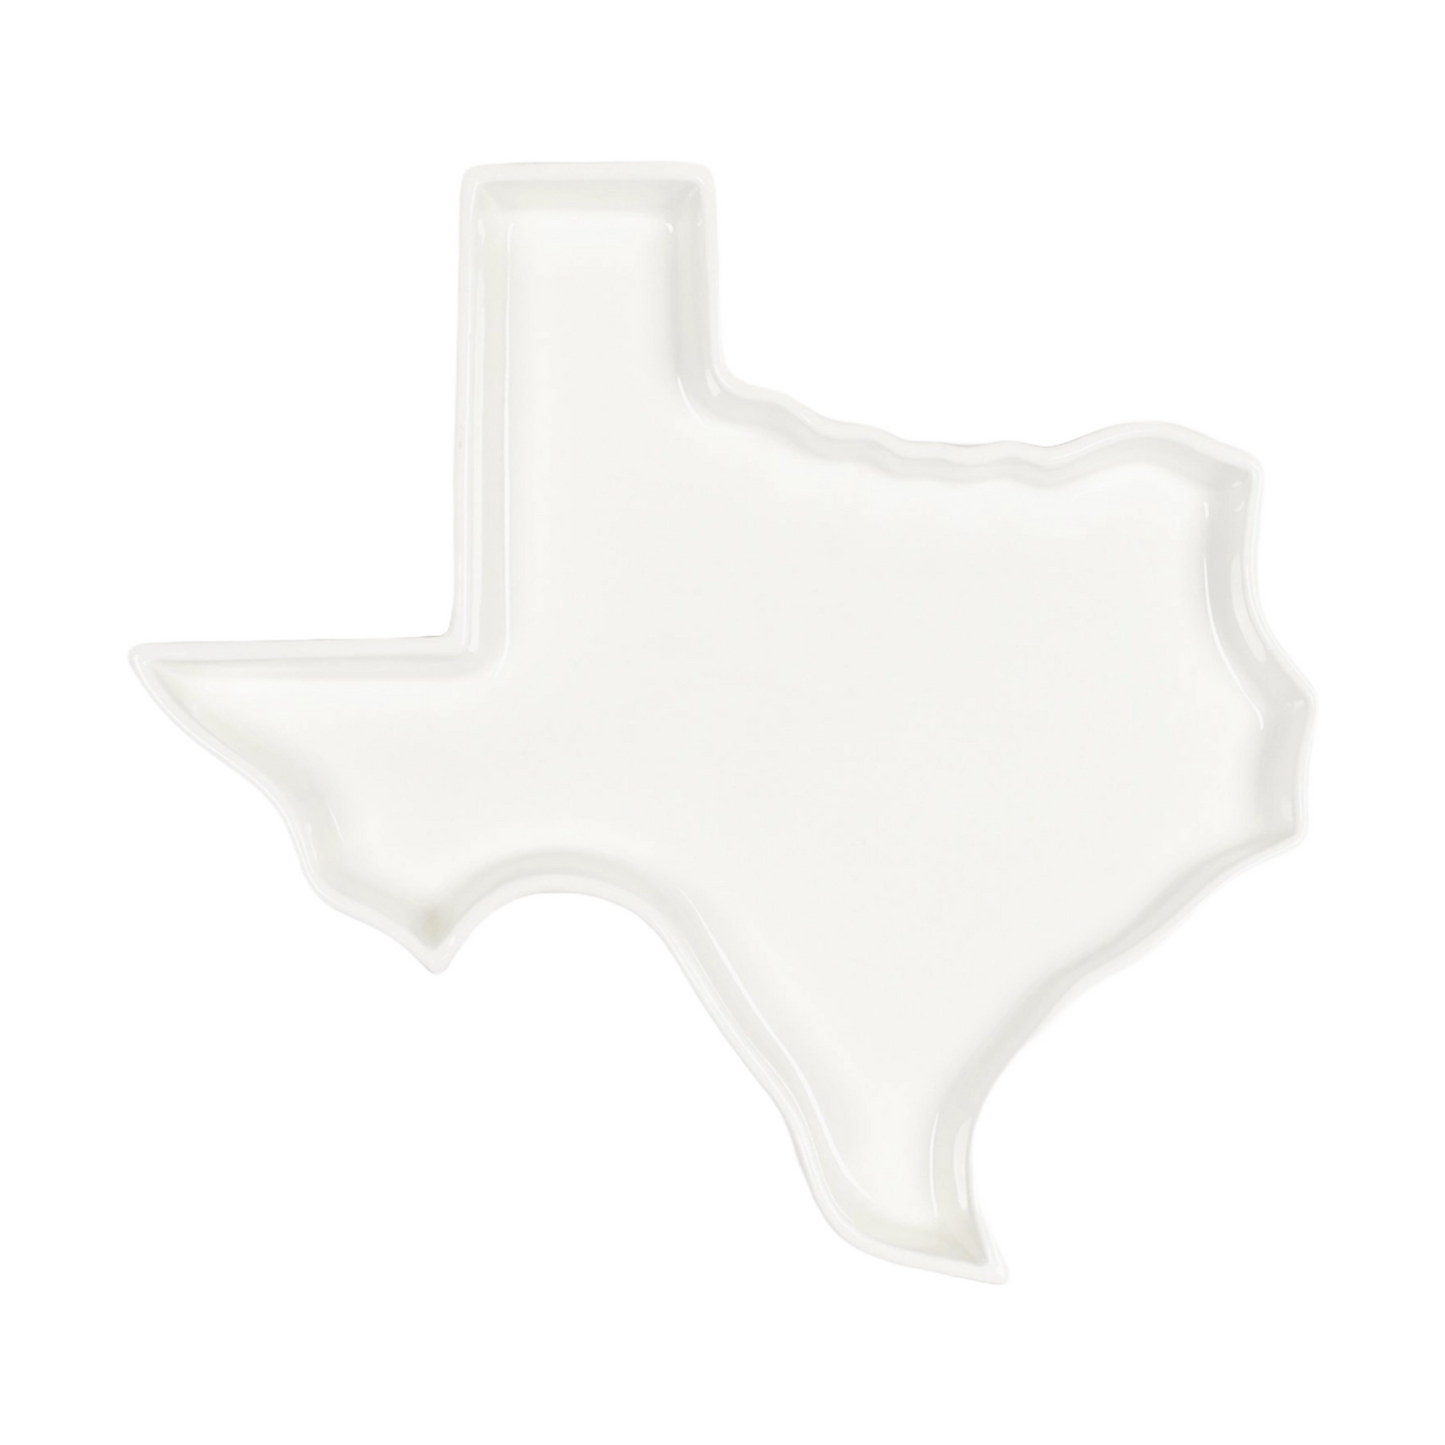 Texas State Plate by Lark